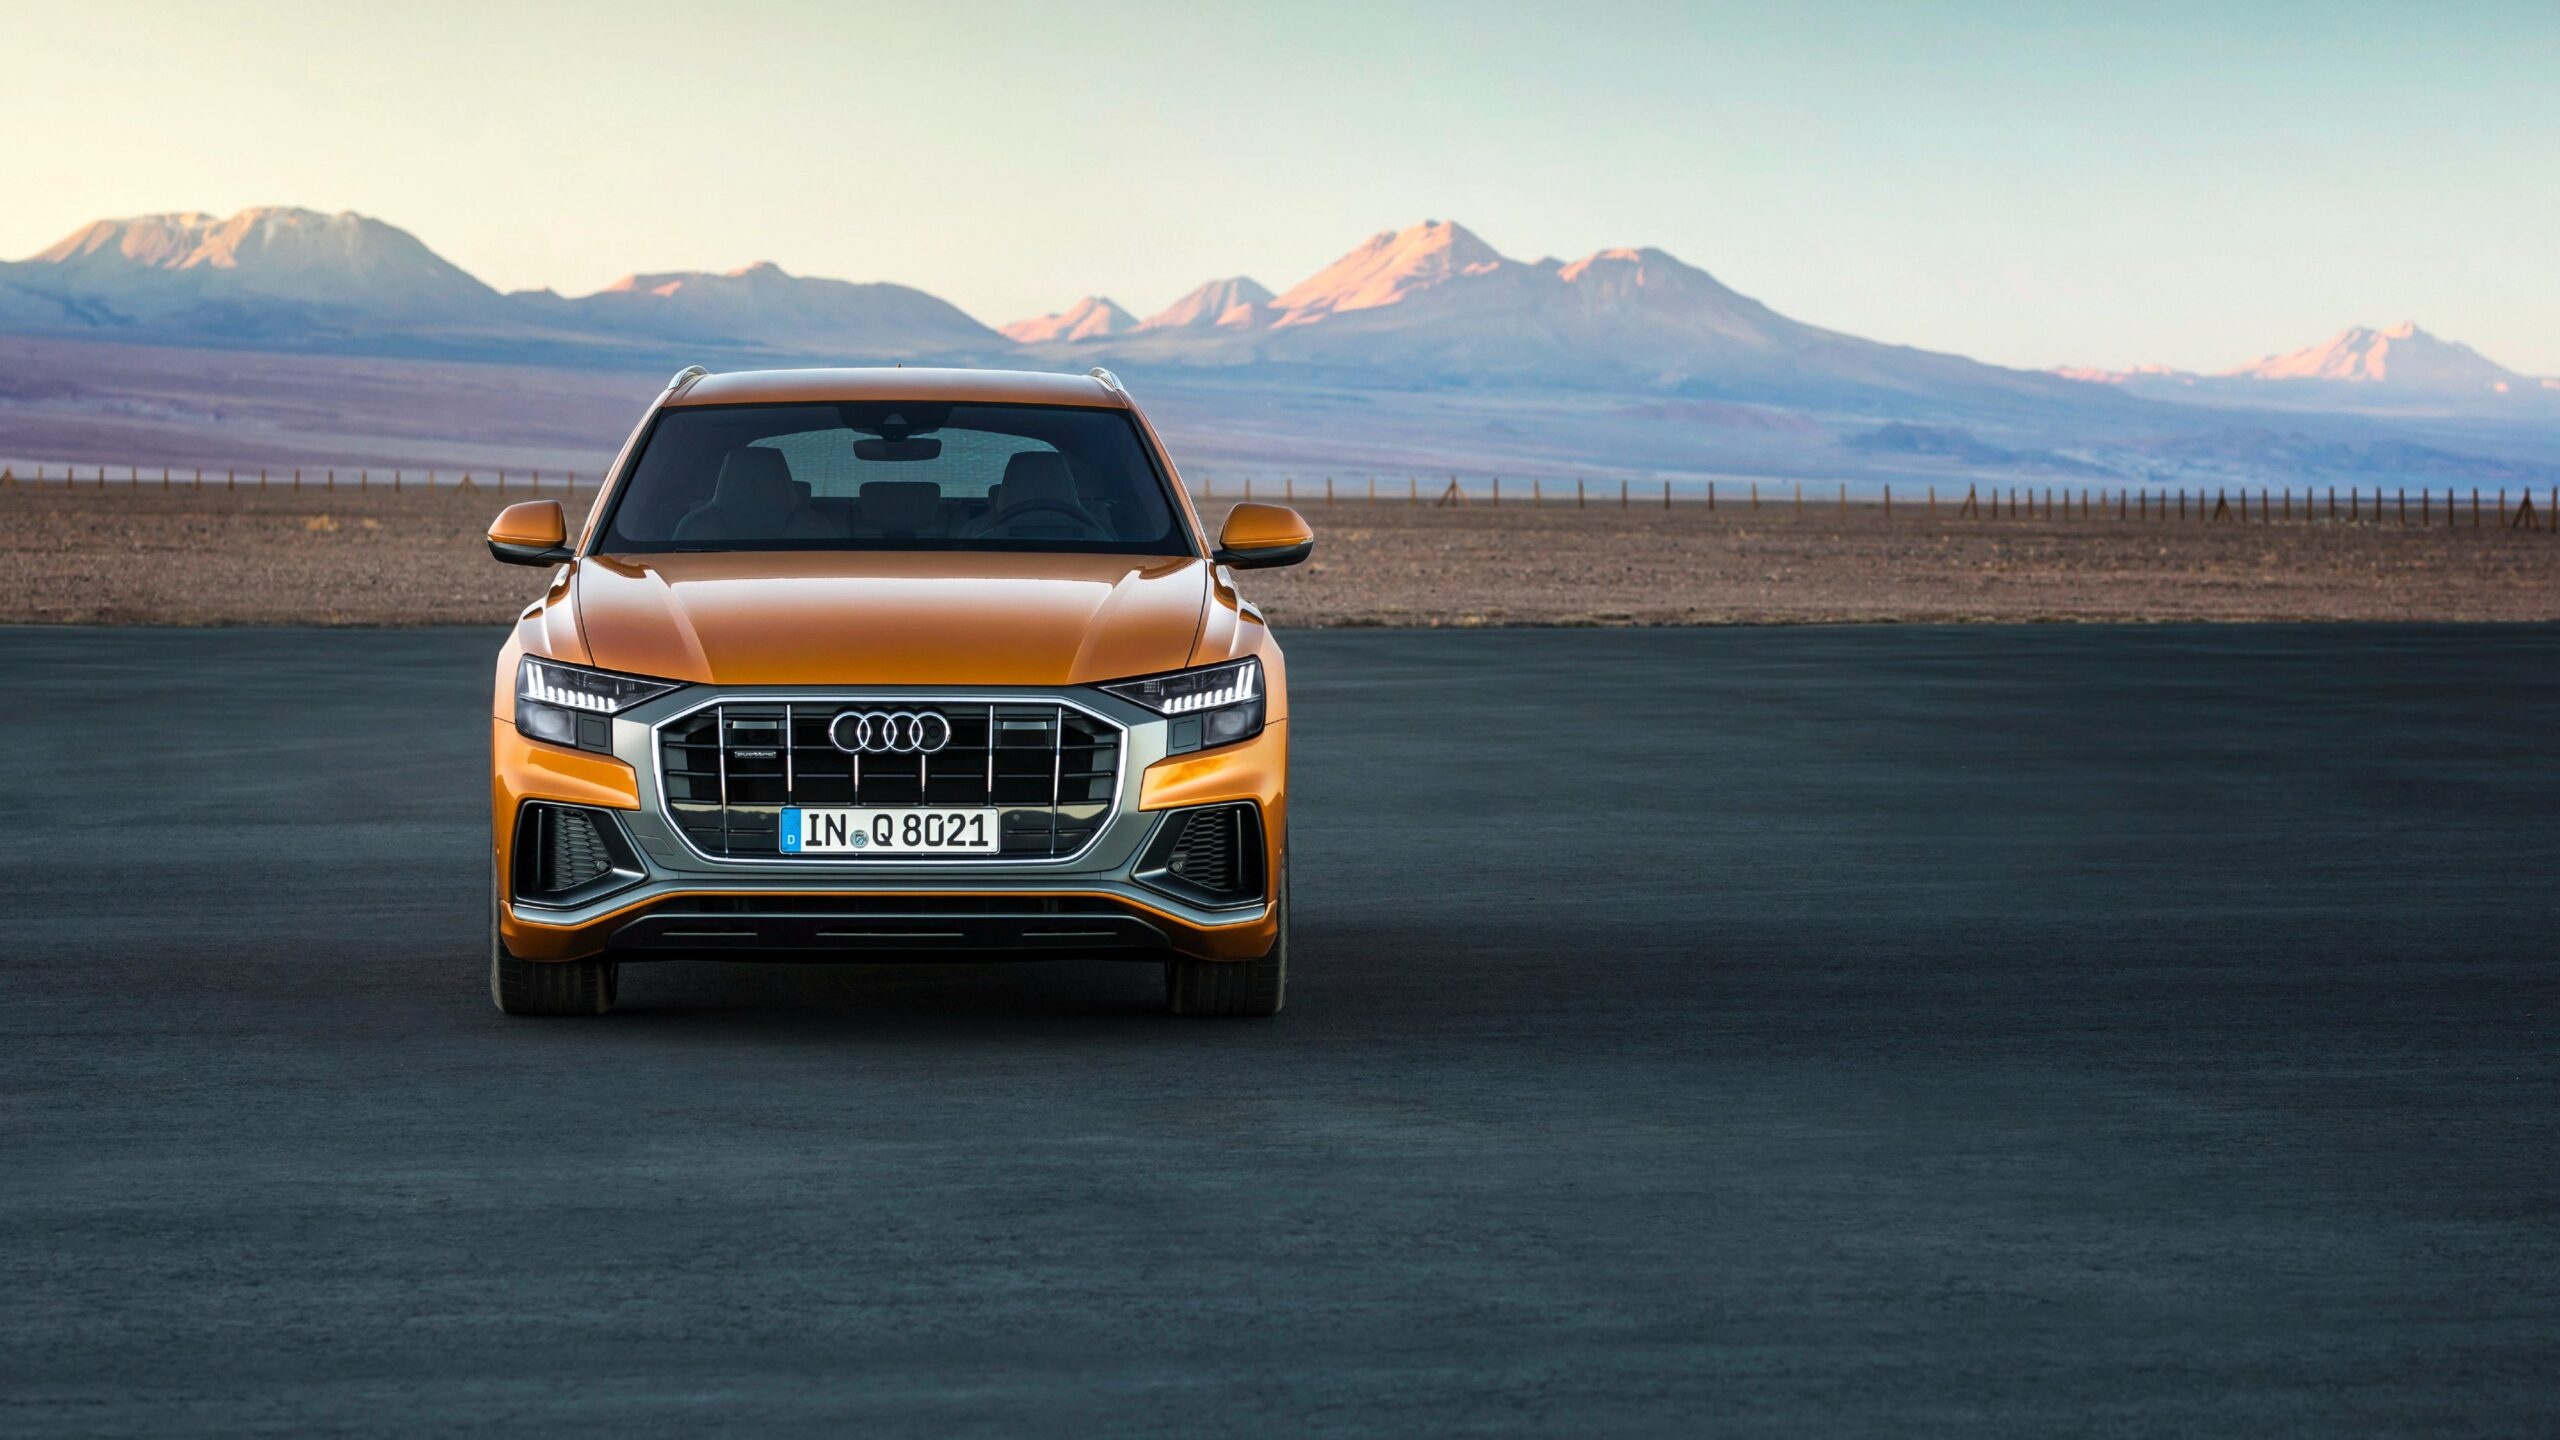 Audi Q8, Pickootech review, Powerful performance, Cutting-edge features, 2560x1440 HD Desktop